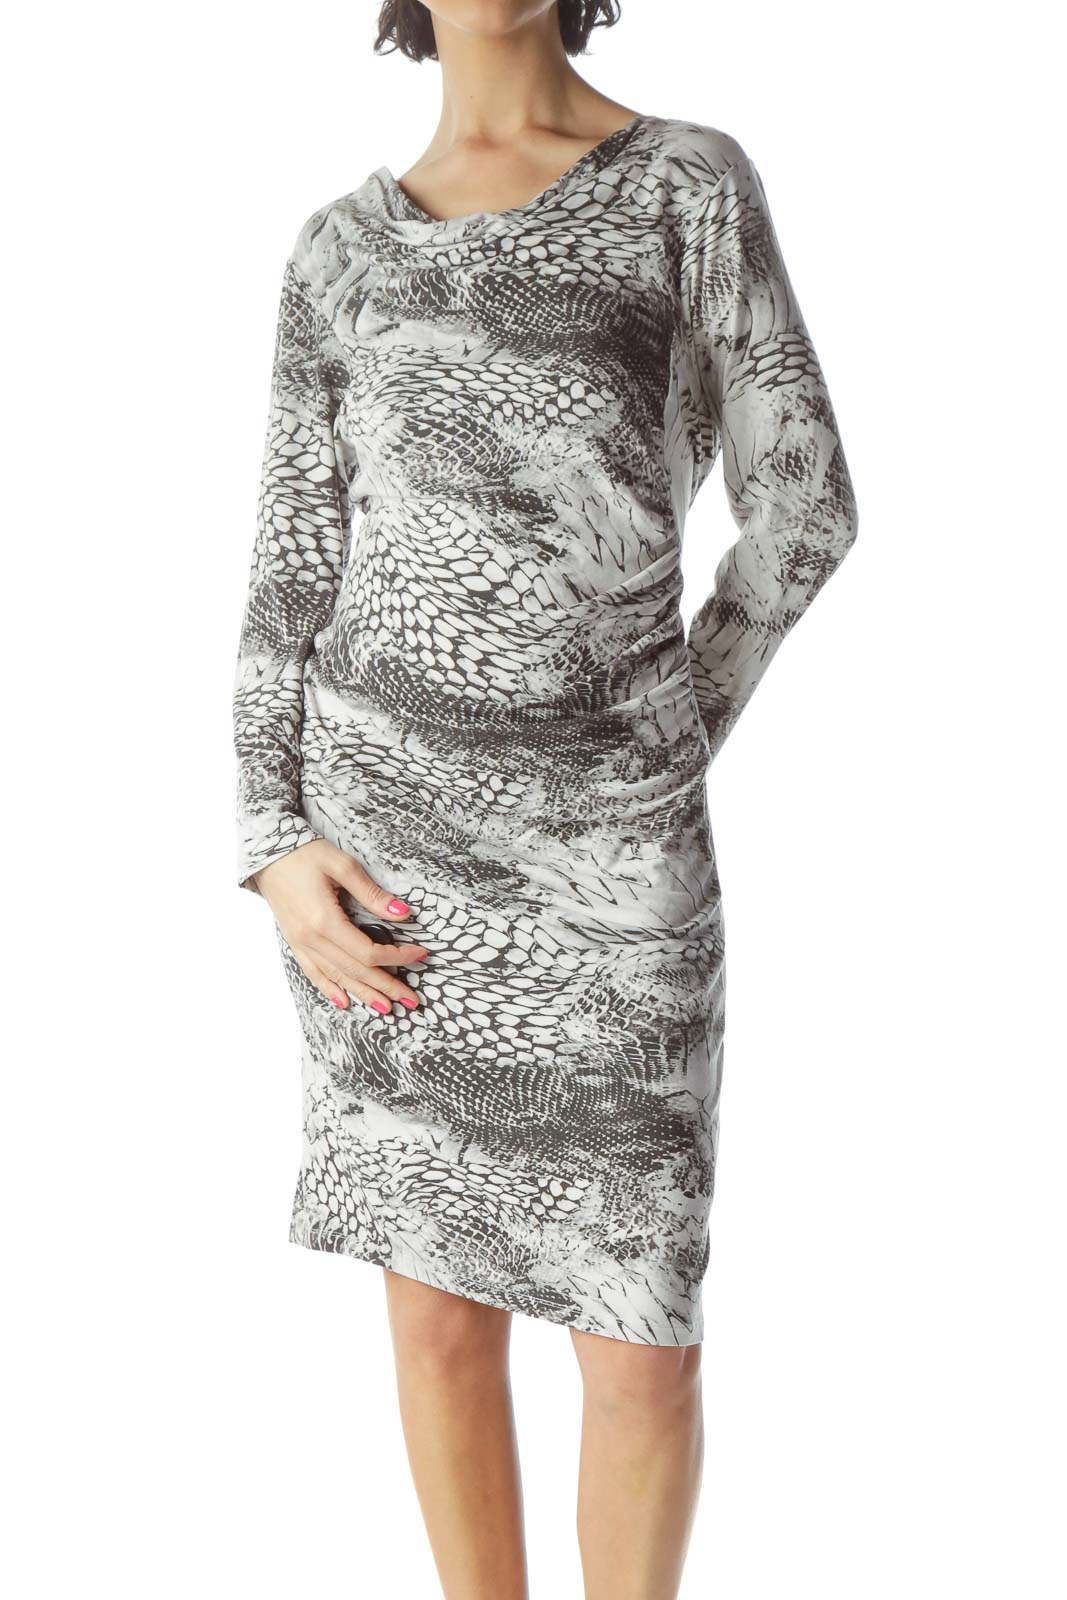 Grey Snake Pattern Fitted Work Dress Front